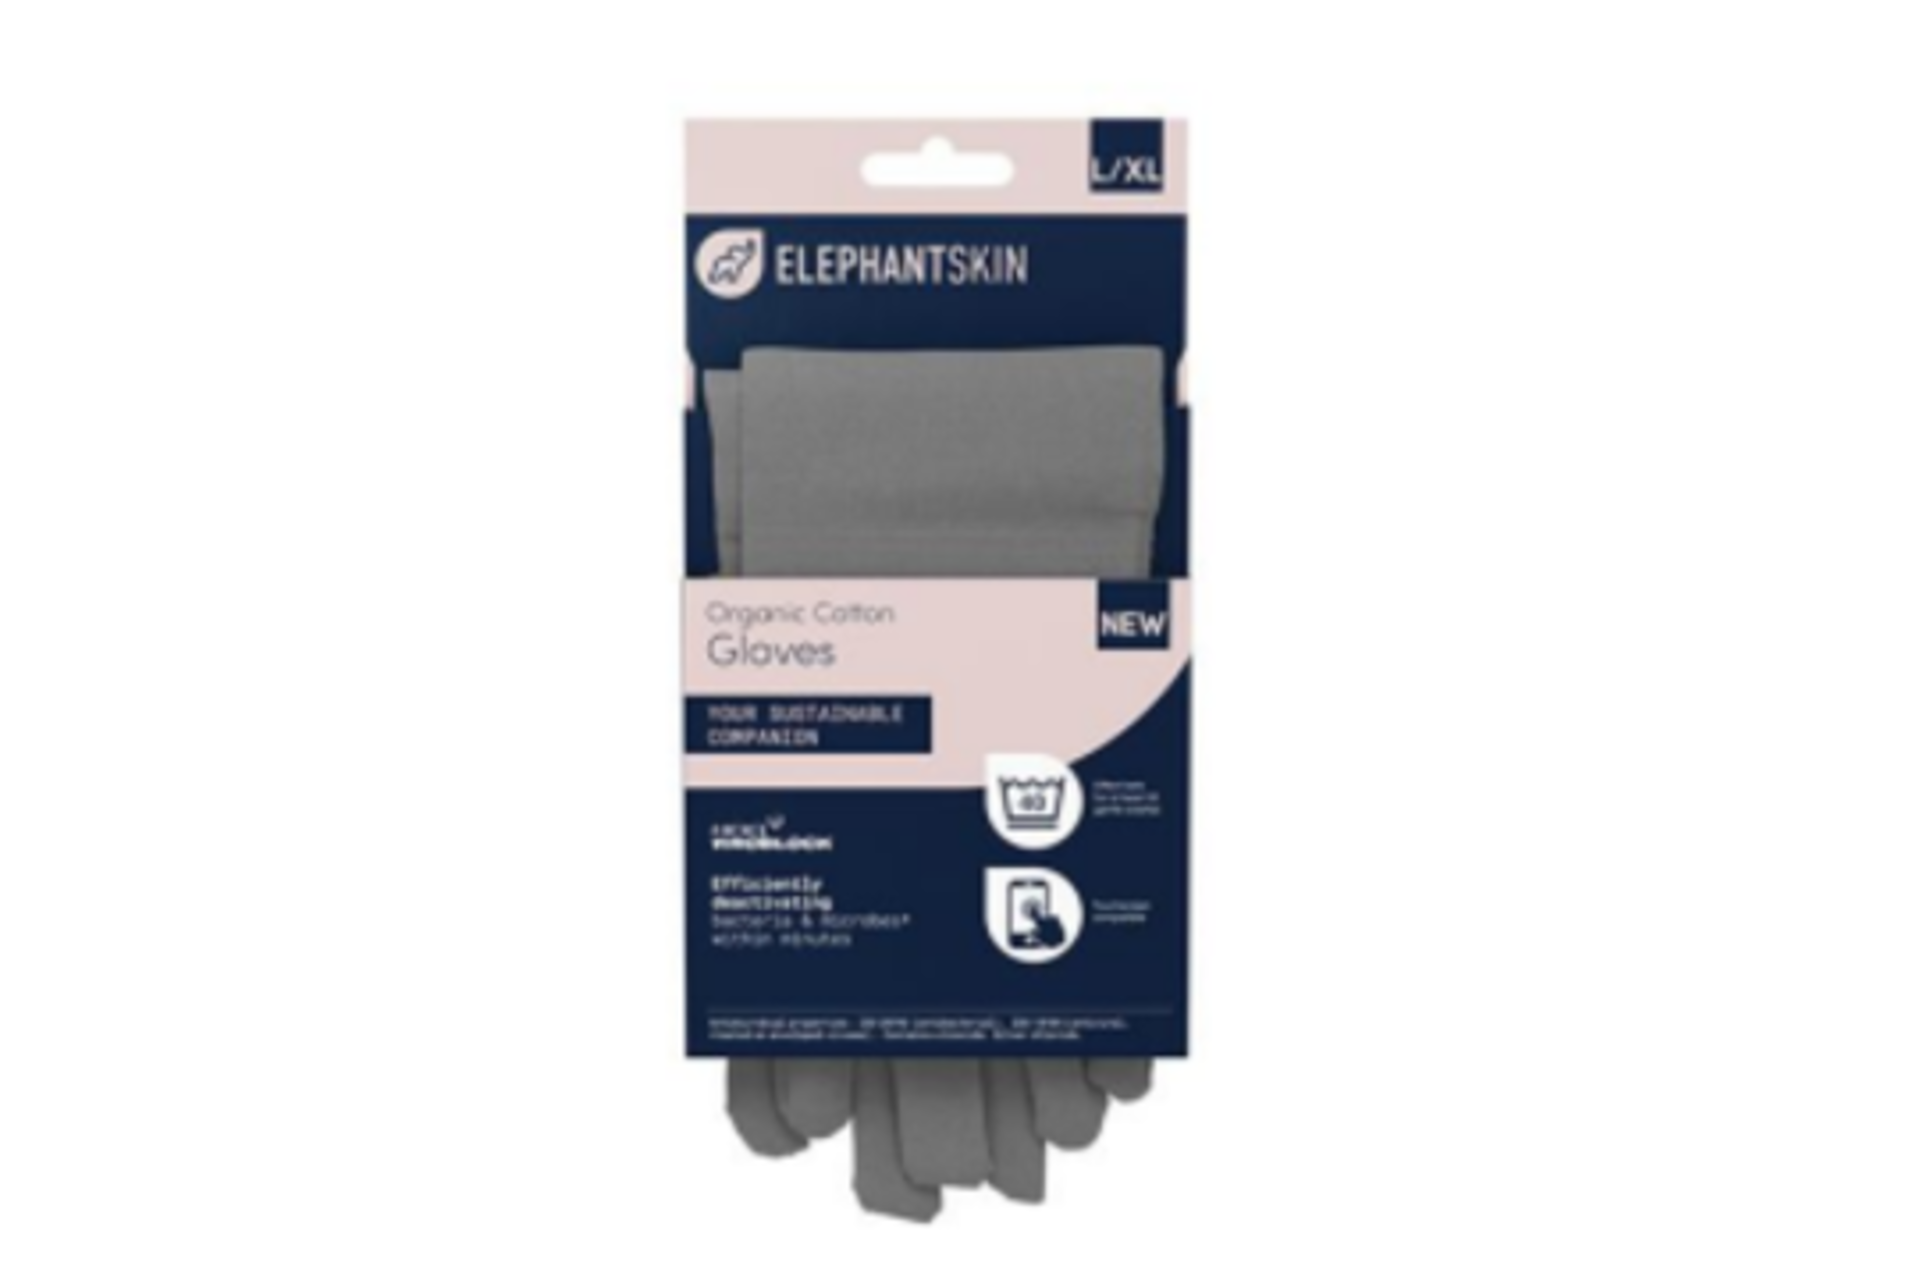 50 X BRAND NEW ELEPHANTSKIN ANTIBACTERIAL GLOVES SIZE L/XL (COLOURS MAY VARY) - Image 2 of 2